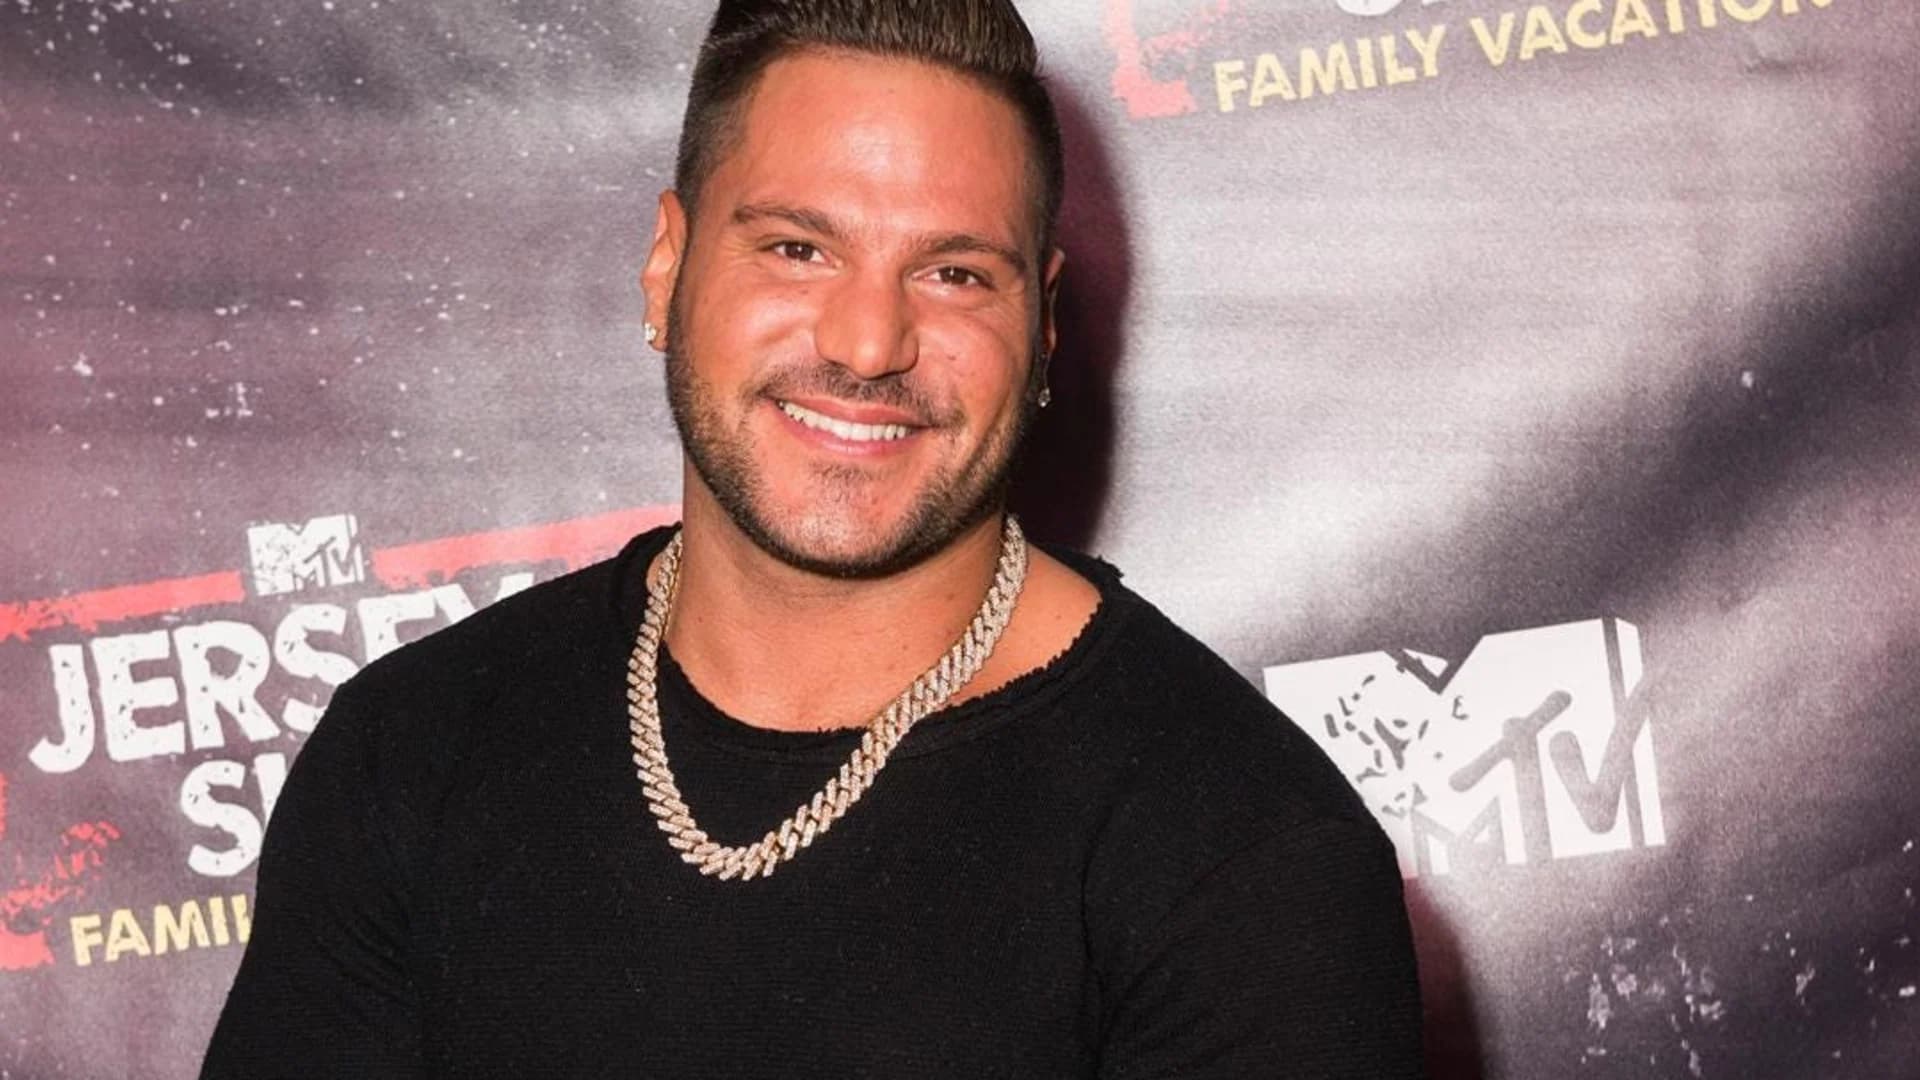 'Jersey Shore' star Ronnie Ortiz-Magro pleads not guilty to domestic violence